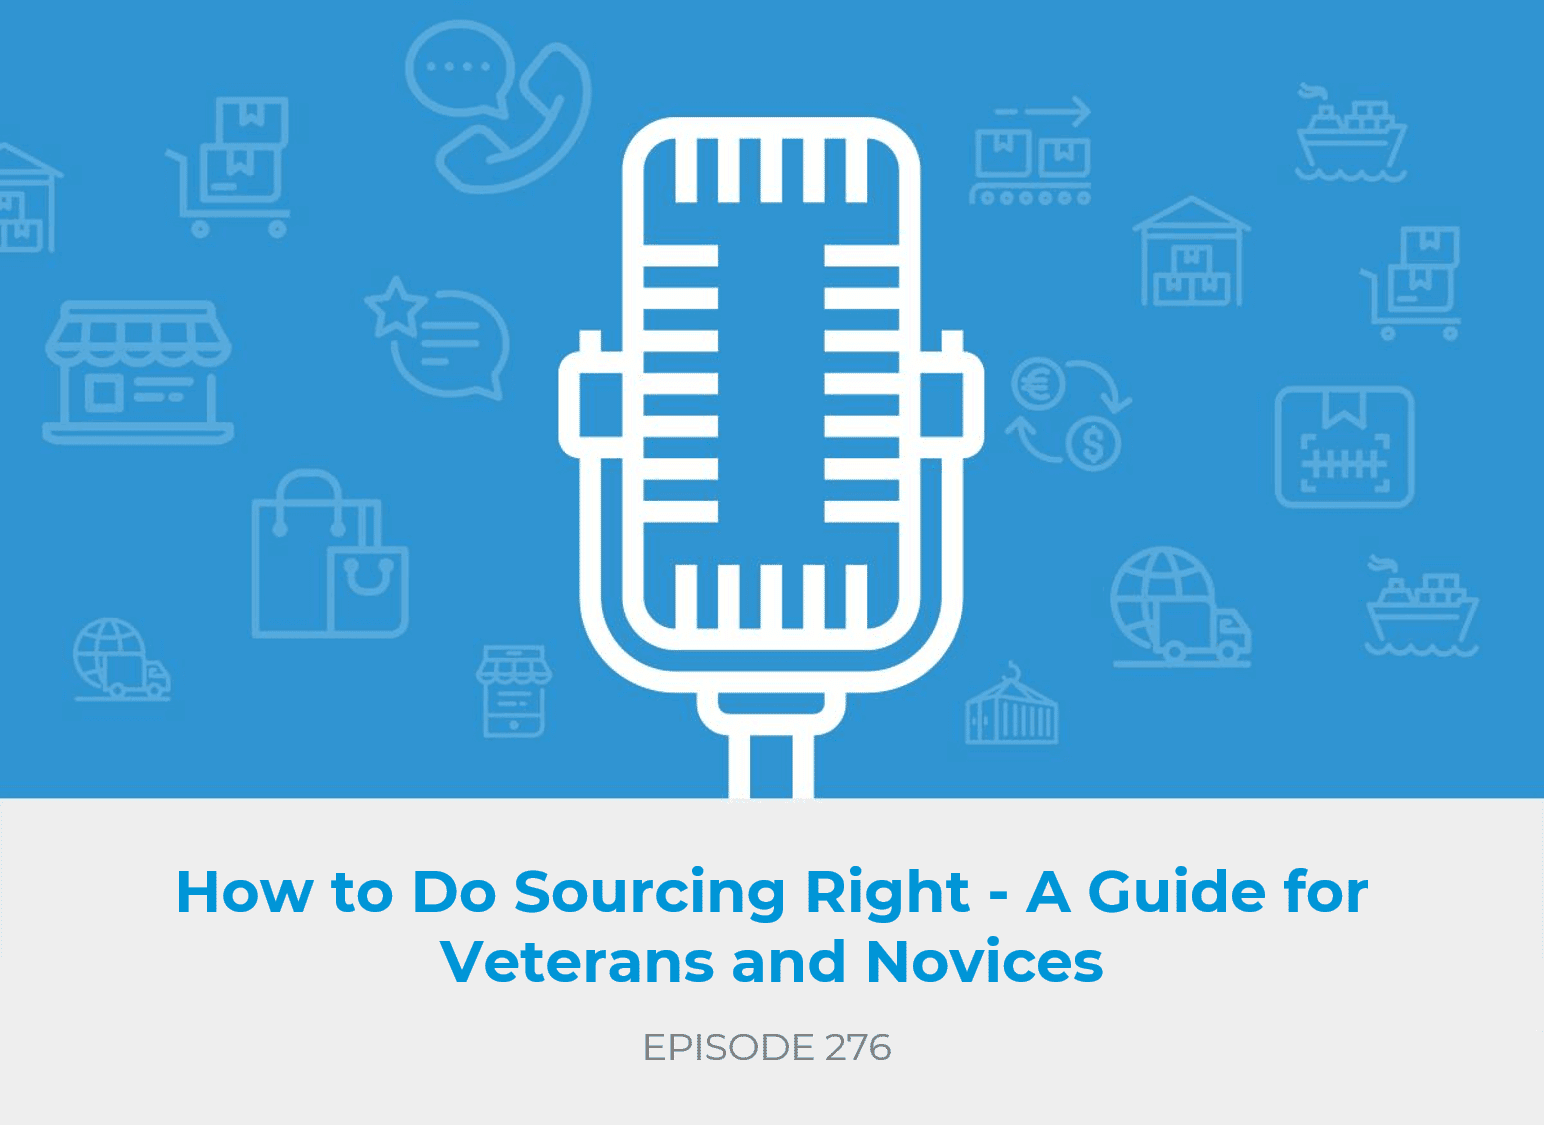 How to Do Sourcing Right - A Guide for Veterans and Novices